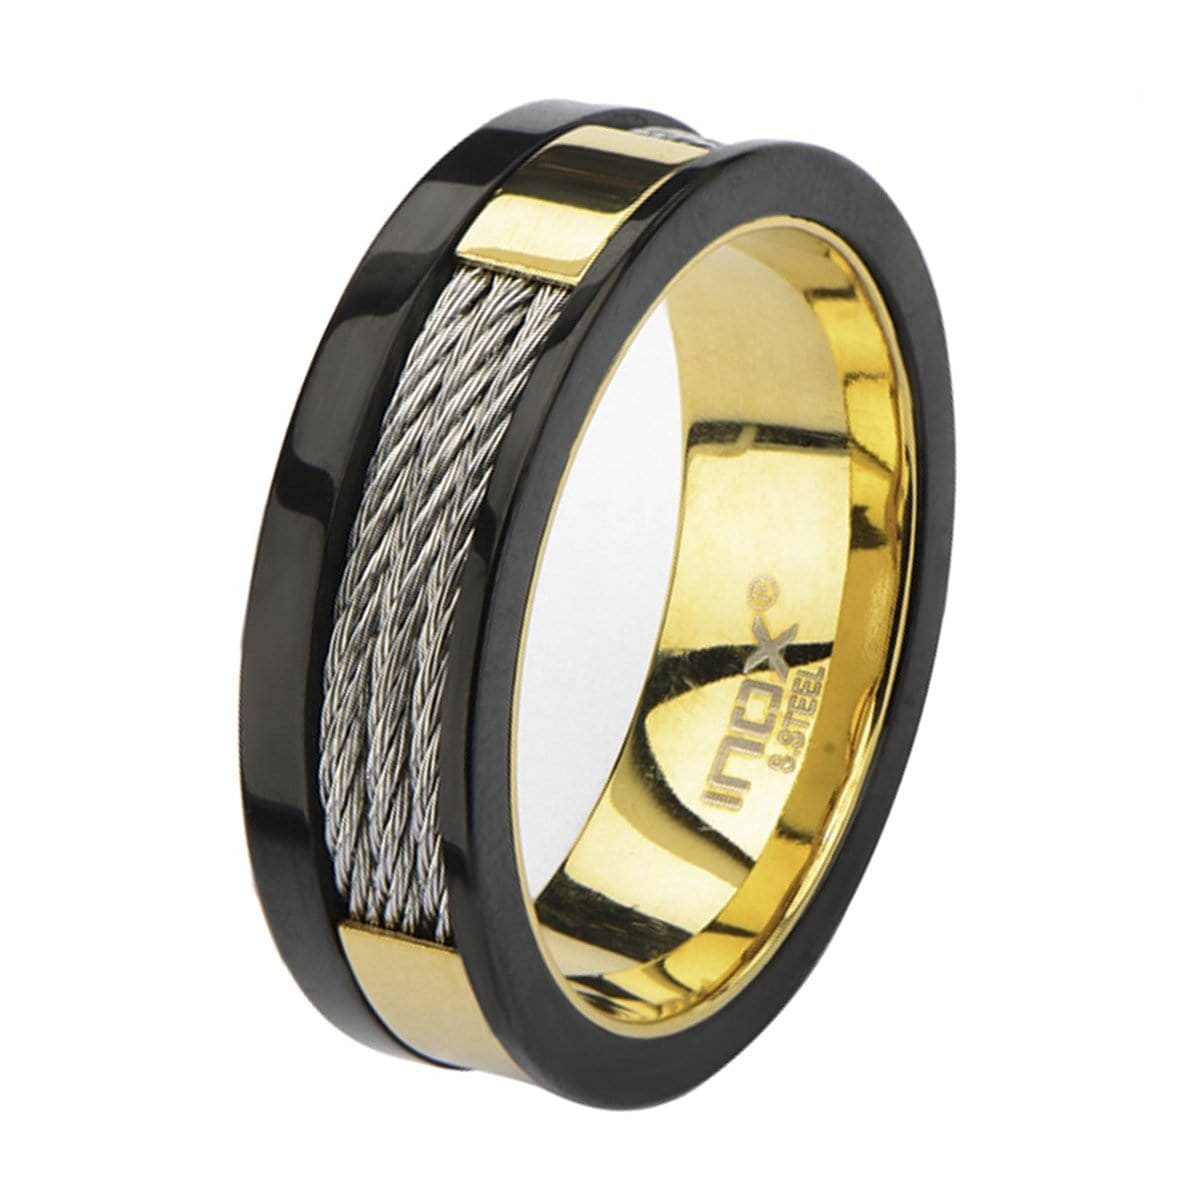 INOX JEWELRY Rings Golden Tone, Black and Silver Tone Stainless Steel Partial Exposed Cable Ring